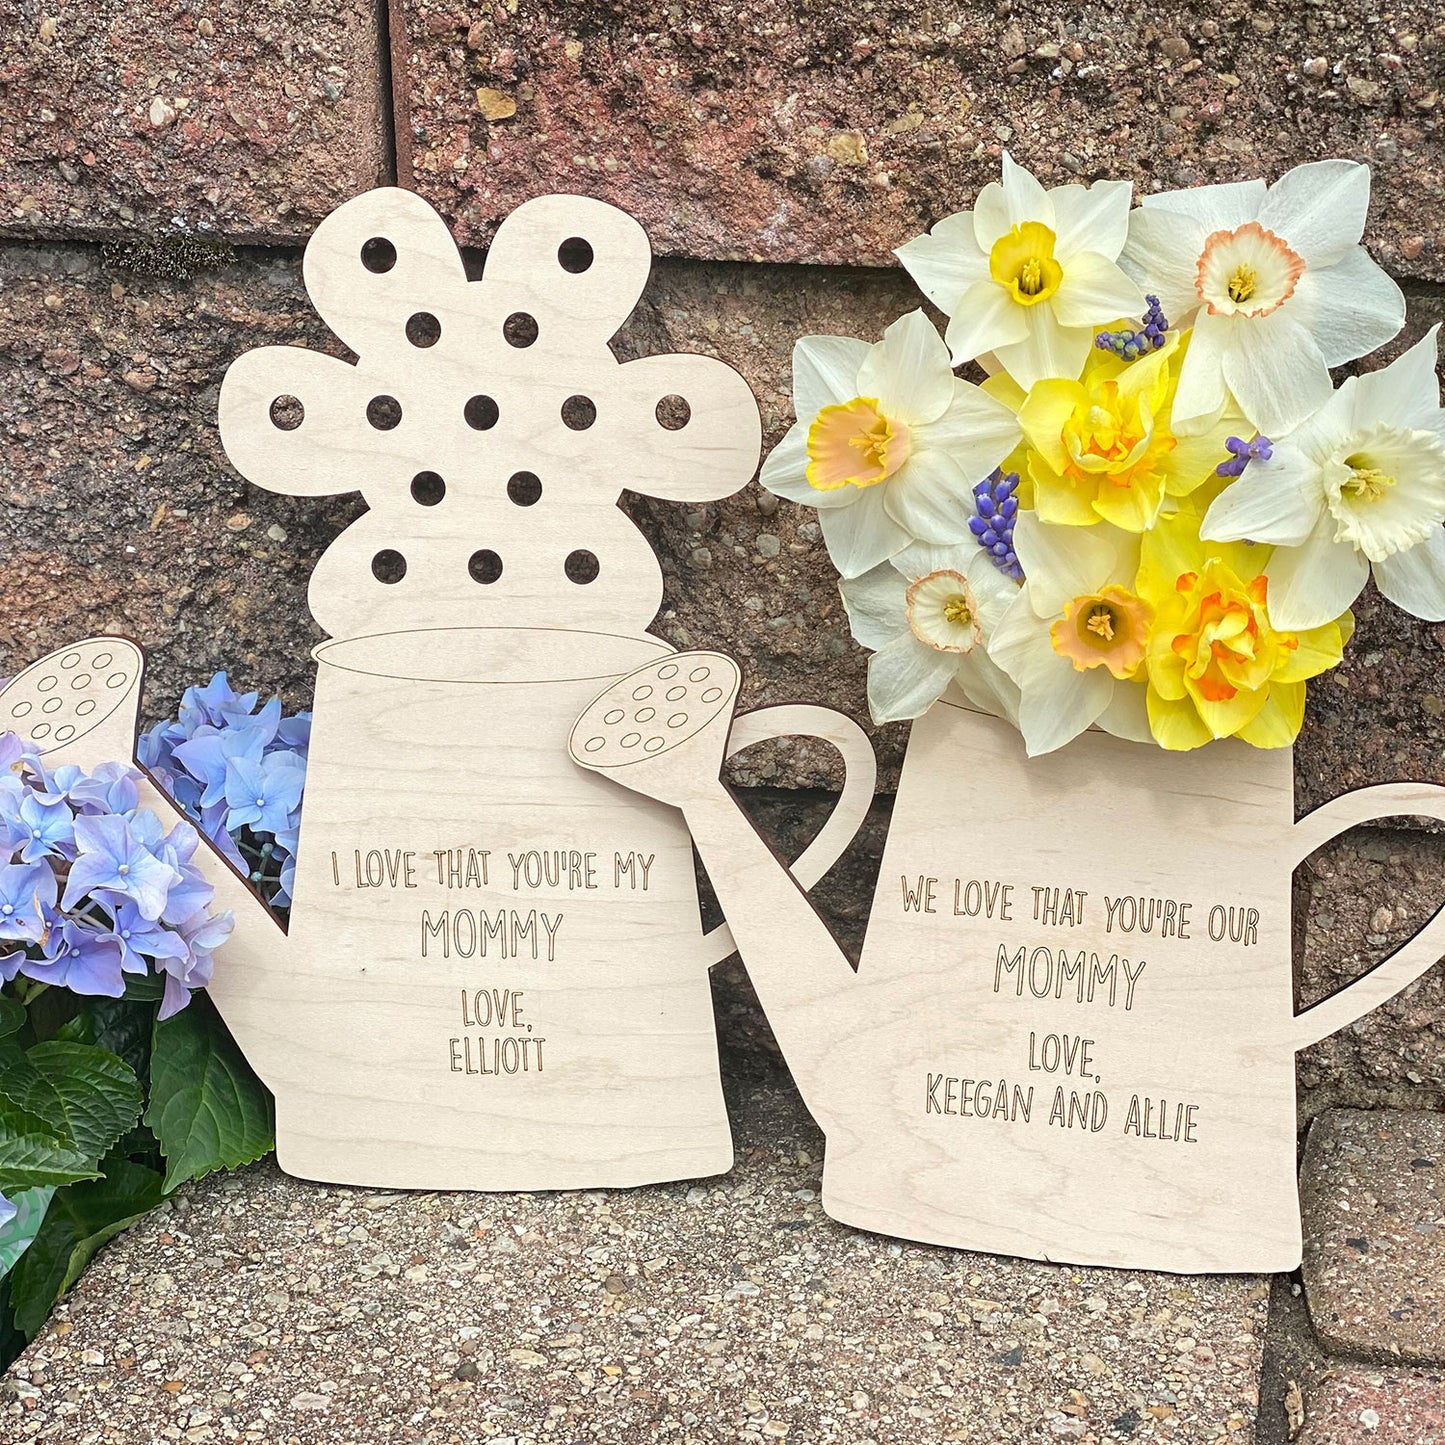 Mother's Day Sprinkling Can Flower Holder Craft for Kids - Special Gift for Mom (Set of 3)